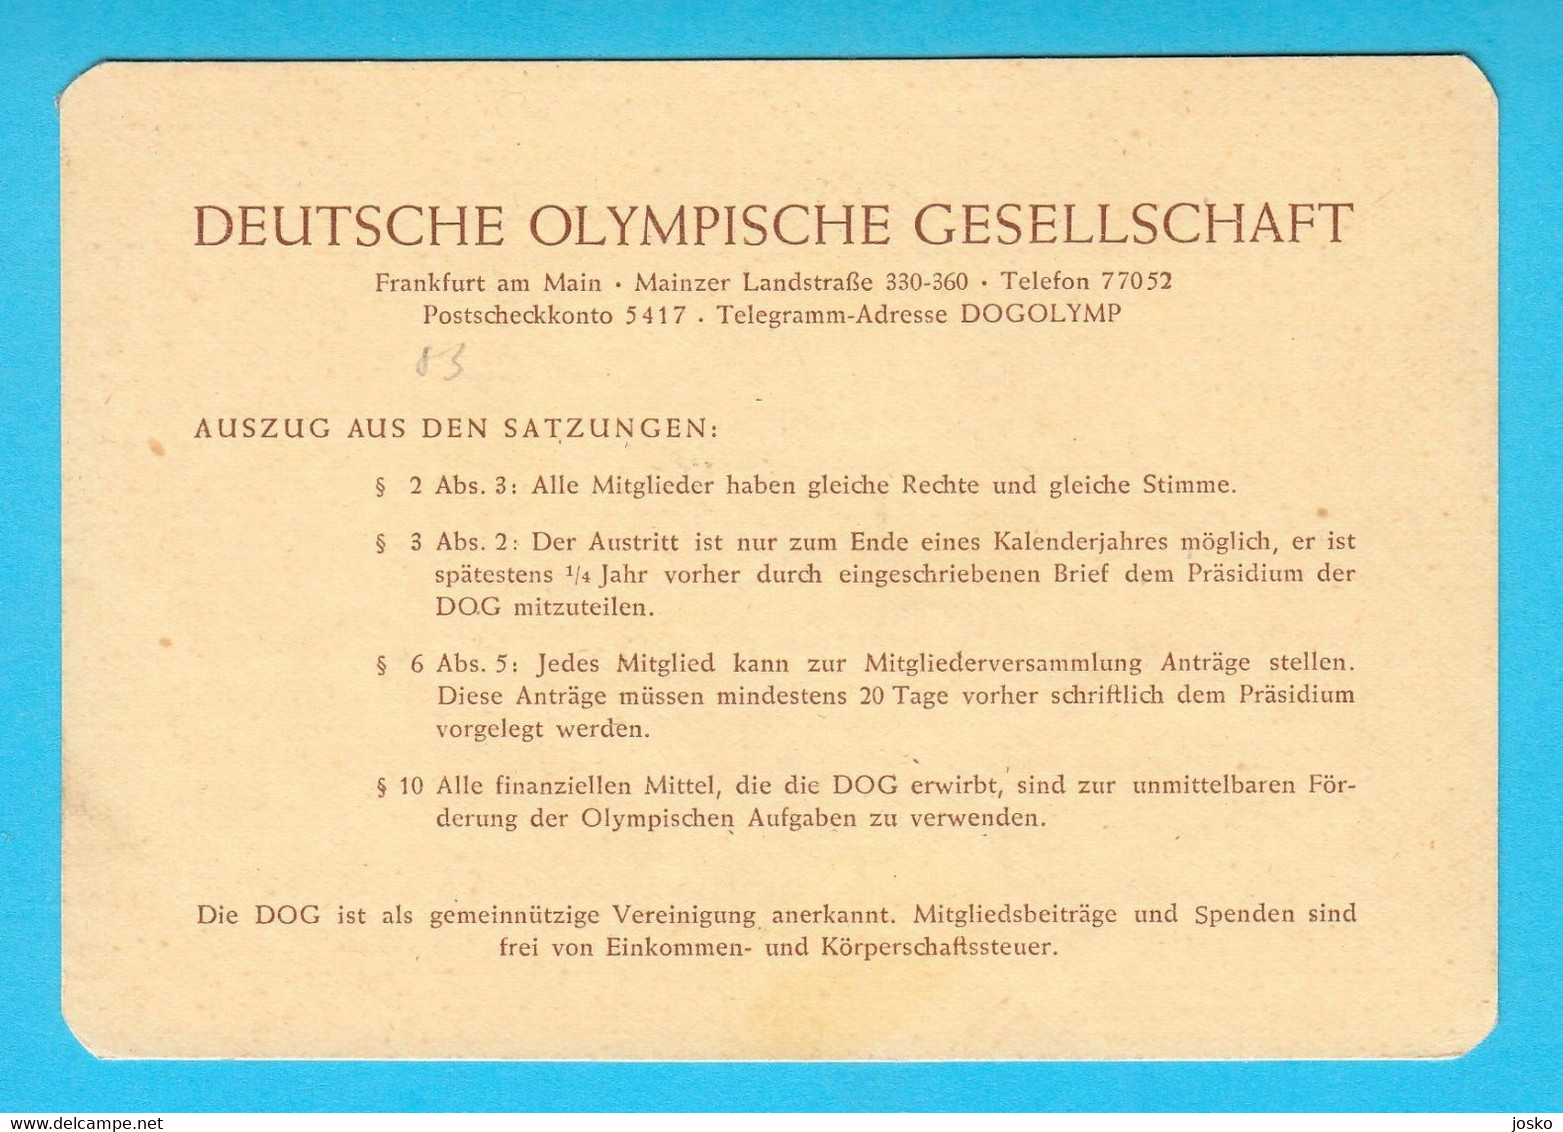 GERMAN OLYMPIC SOCIETY (Deutsche Olympische Gesellschaft - Wiesbaden) Vintage Membership Card * Olympic Games Olympiade - Apparel, Souvenirs & Other